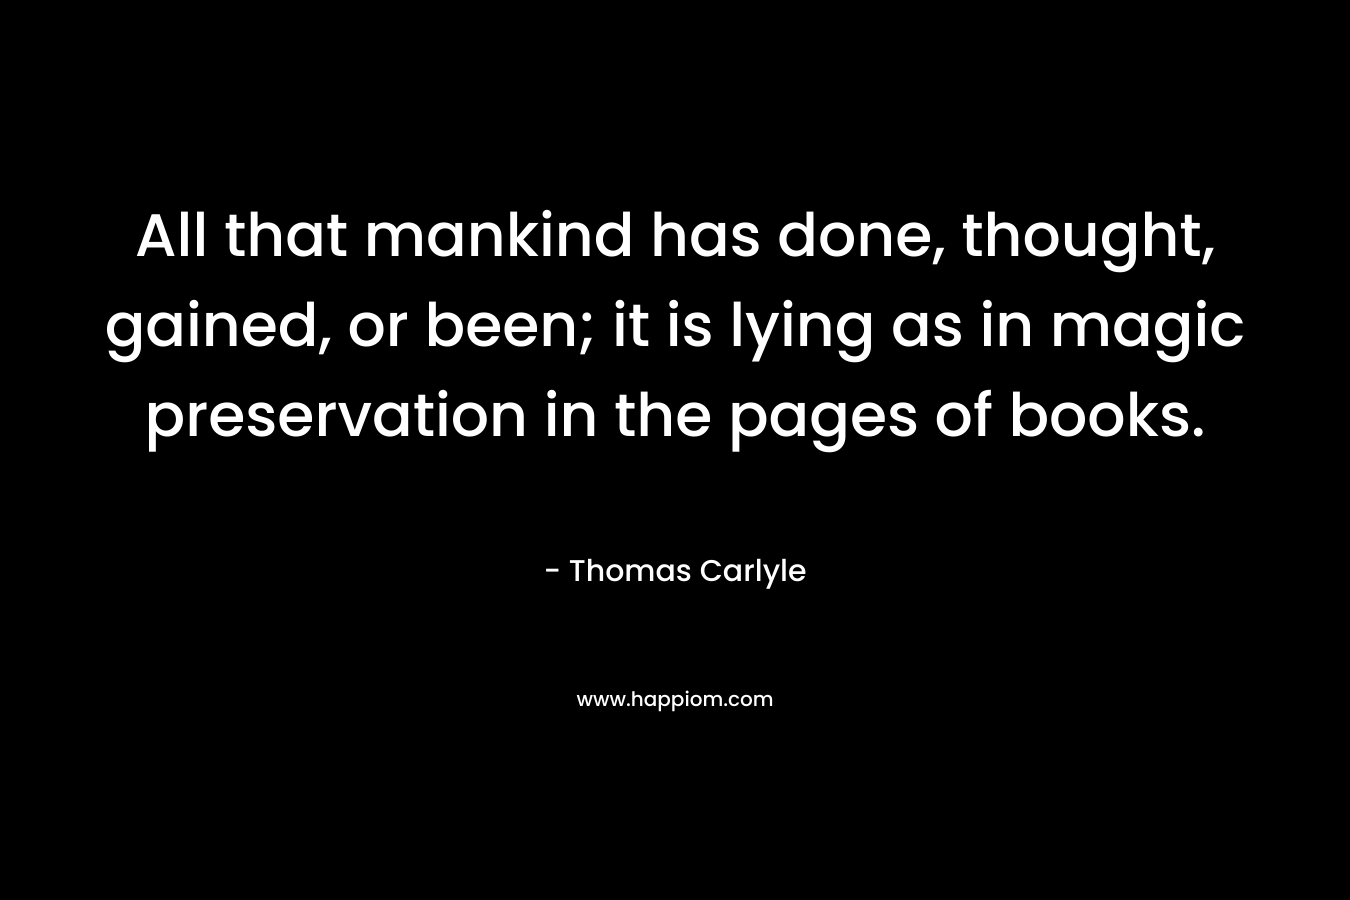 All that mankind has done, thought, gained, or been; it is lying as in magic preservation in the pages of books. – Thomas Carlyle